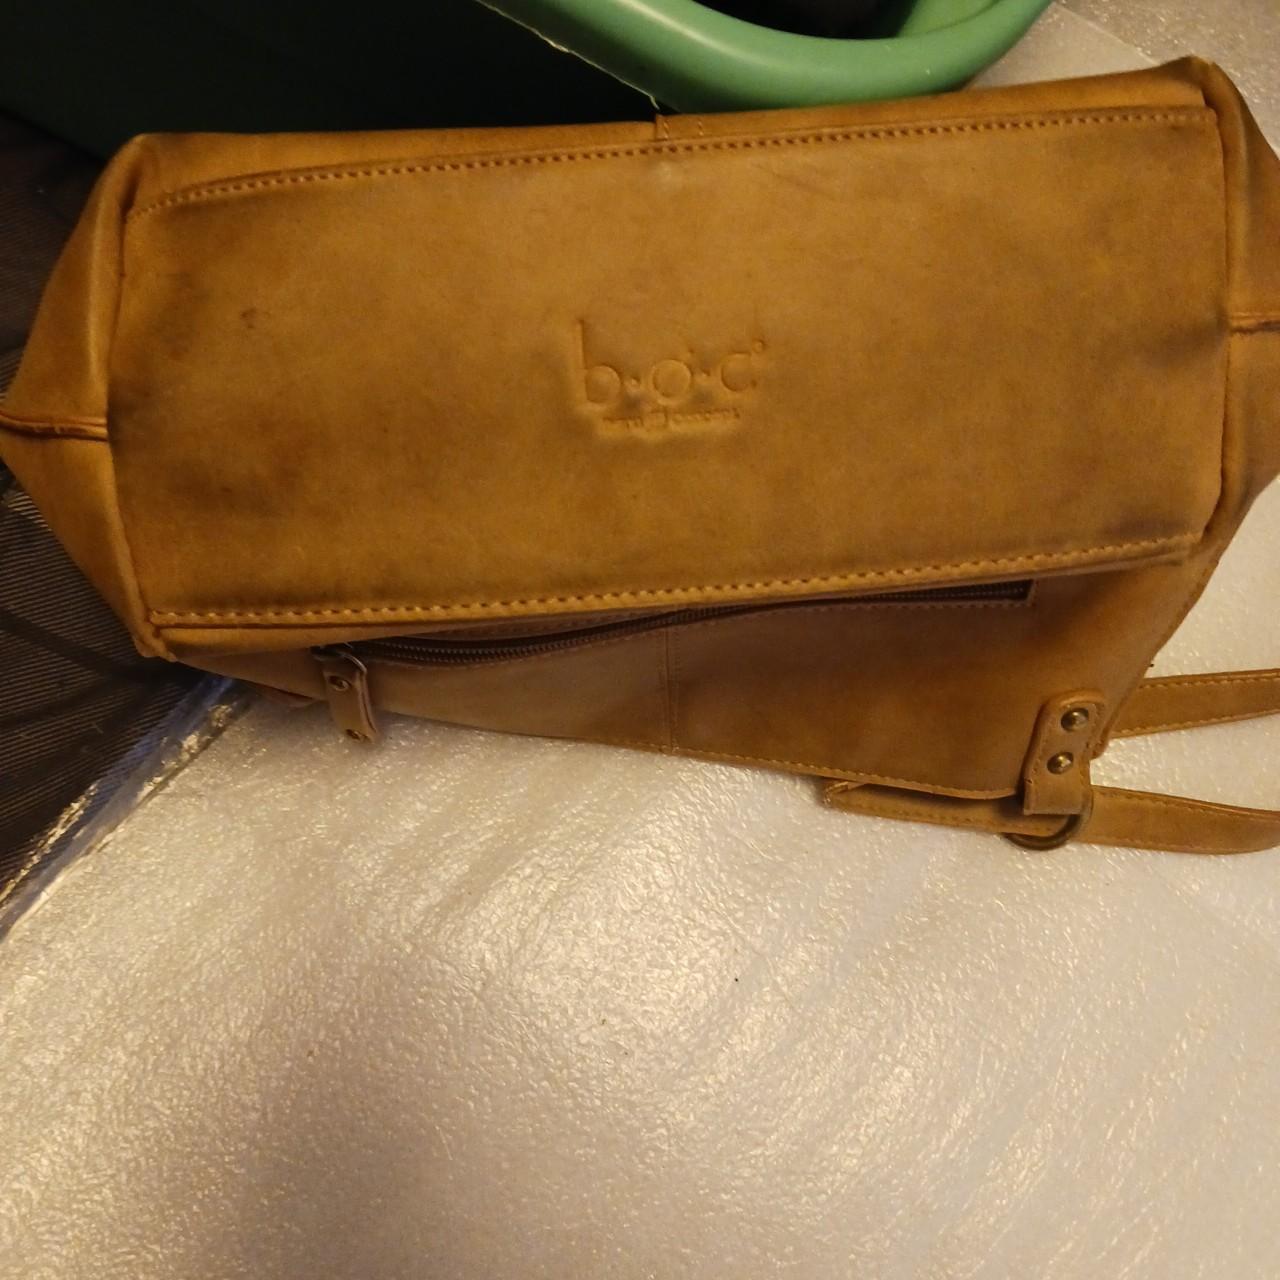 Product Image 3 - Great leather bag goes with